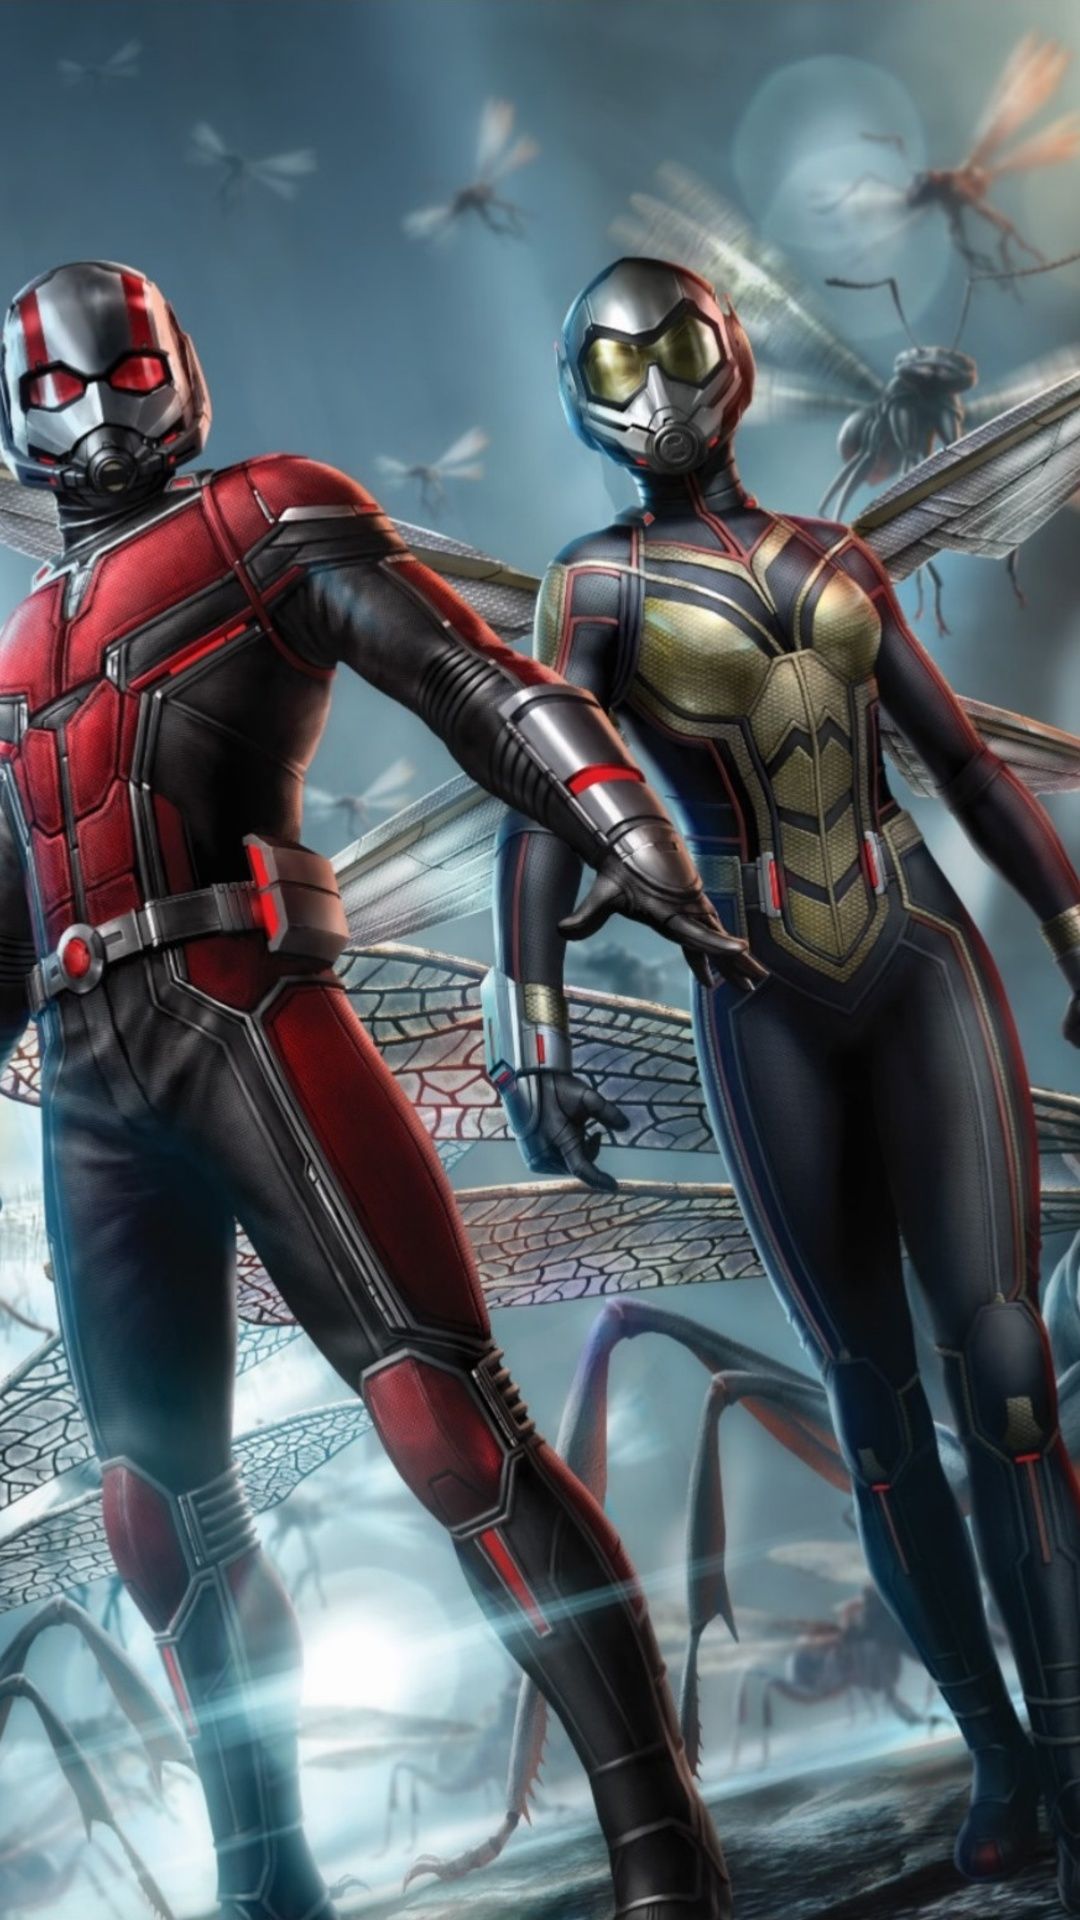 1080x1920 ant man and the wasp, ant man, hd, 2018 movies, movies, poster for iPhone 8 wallpaper